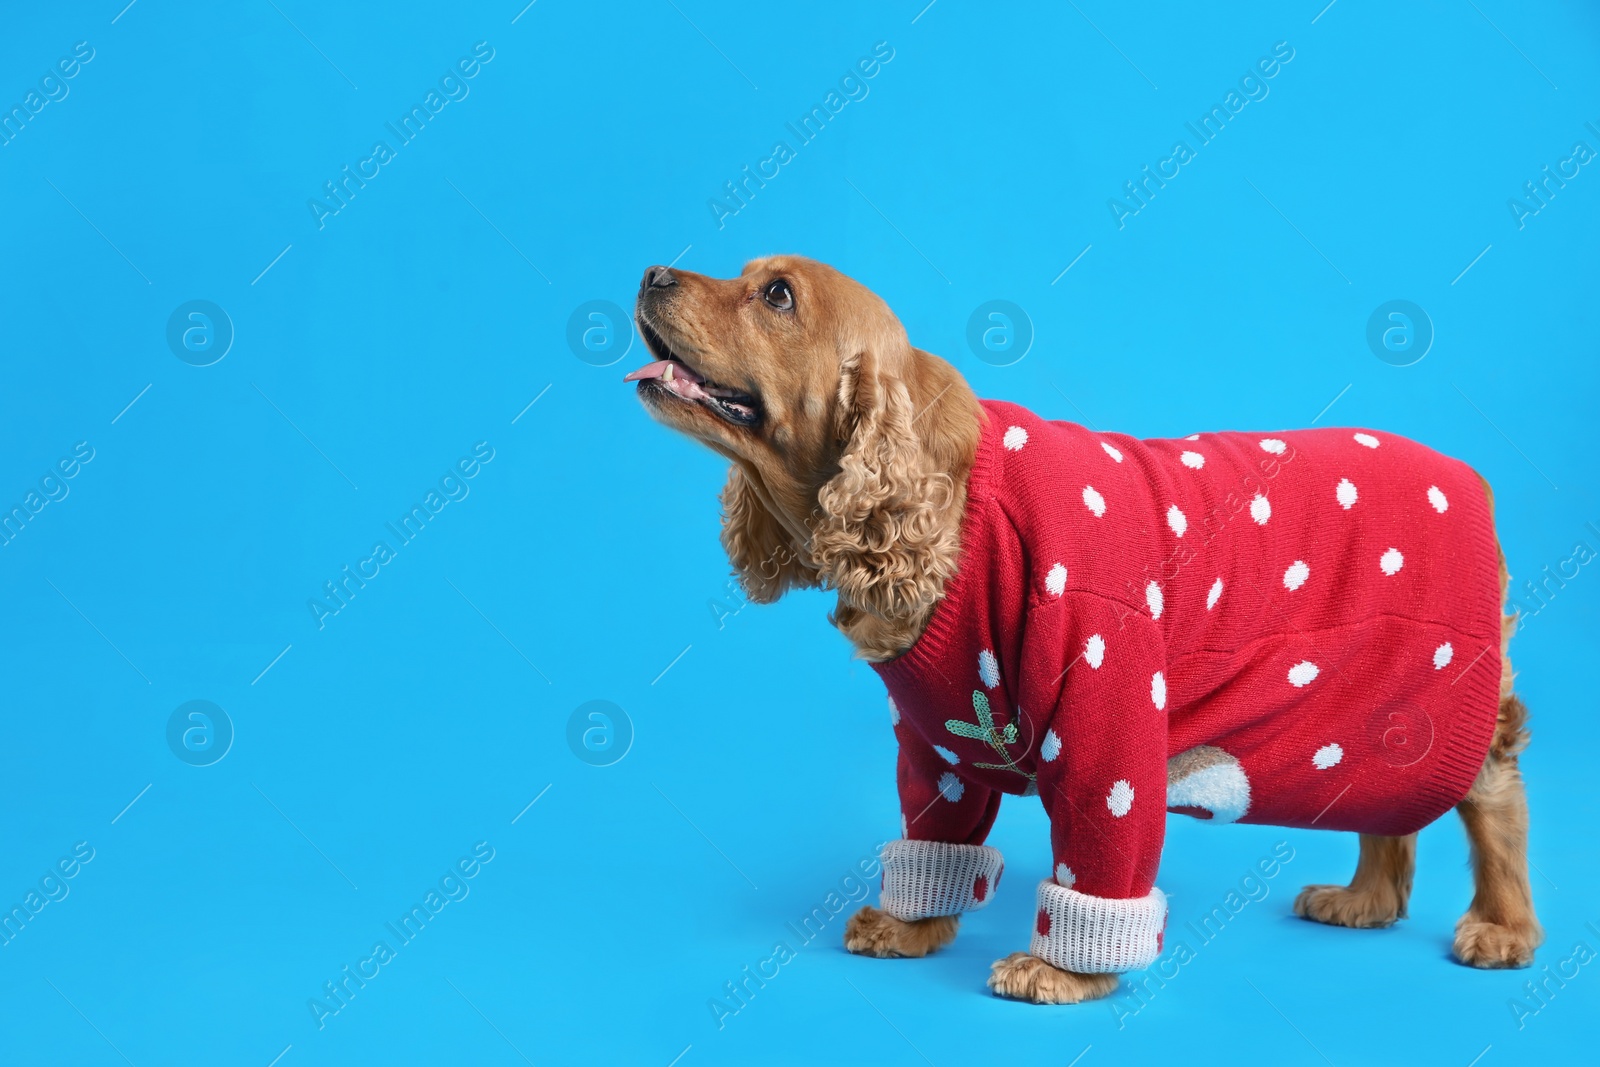 Photo of Adorable Cocker Spaniel in Christmas sweater on light blue background, space for text